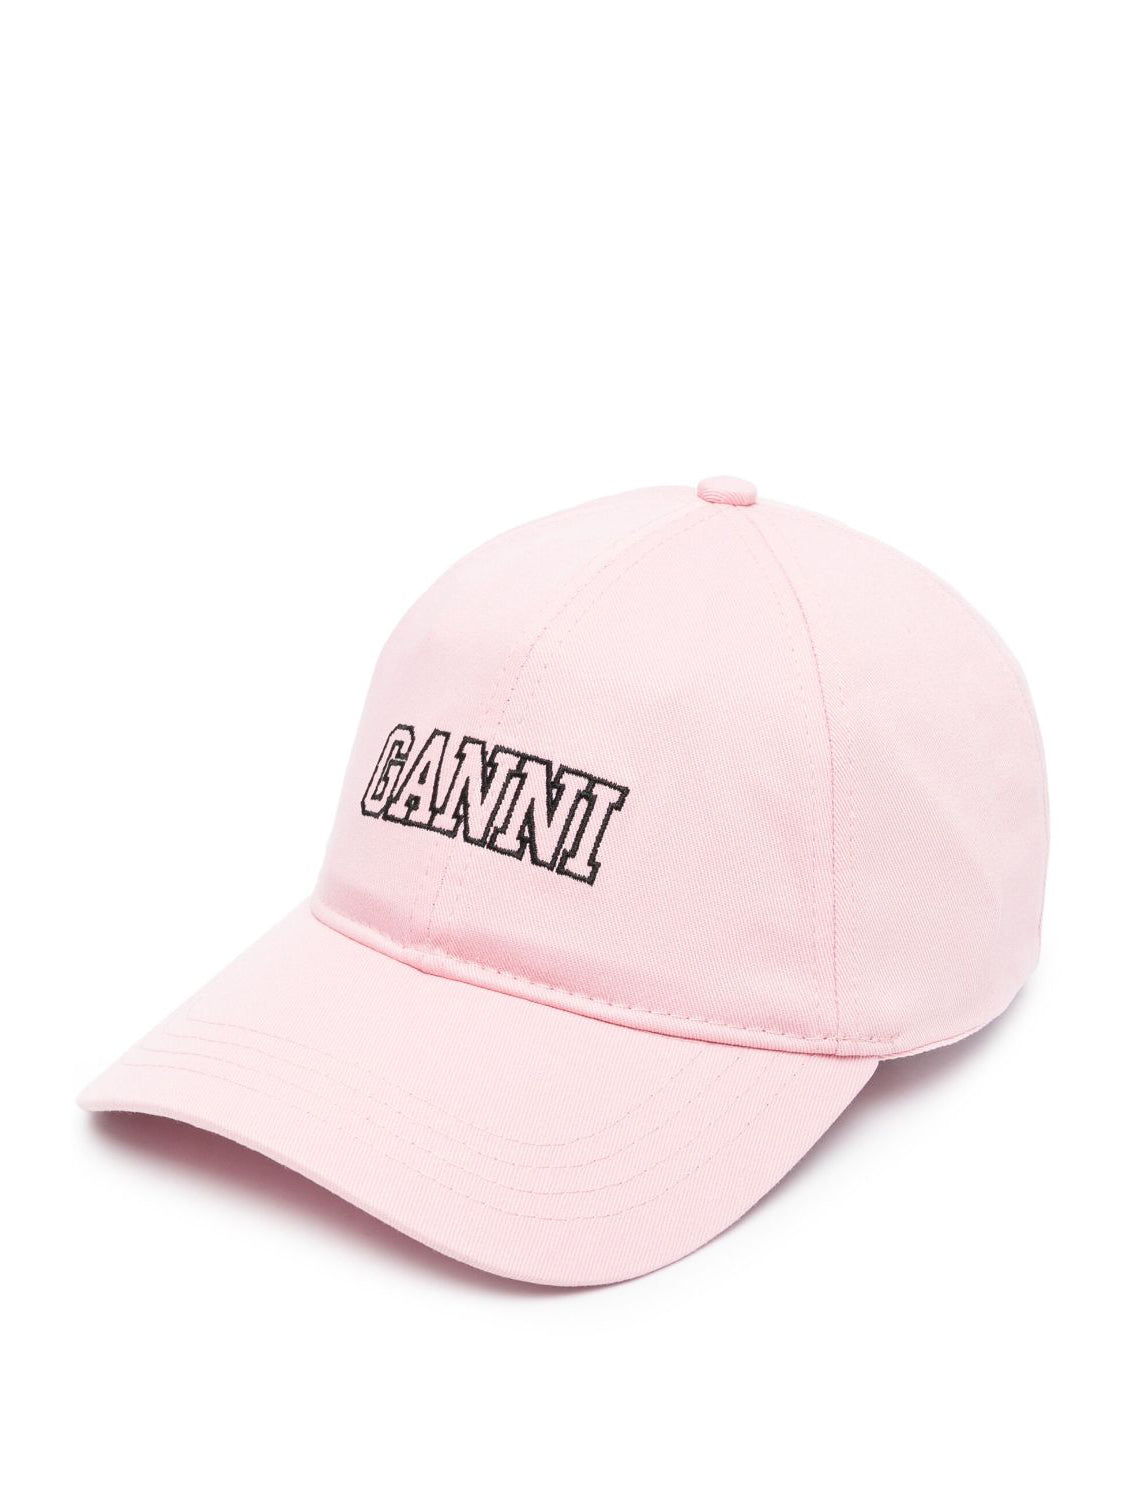 Ganni, Embroidered-logo cotton baseball cap in light pink, sold by My o My Helsinki